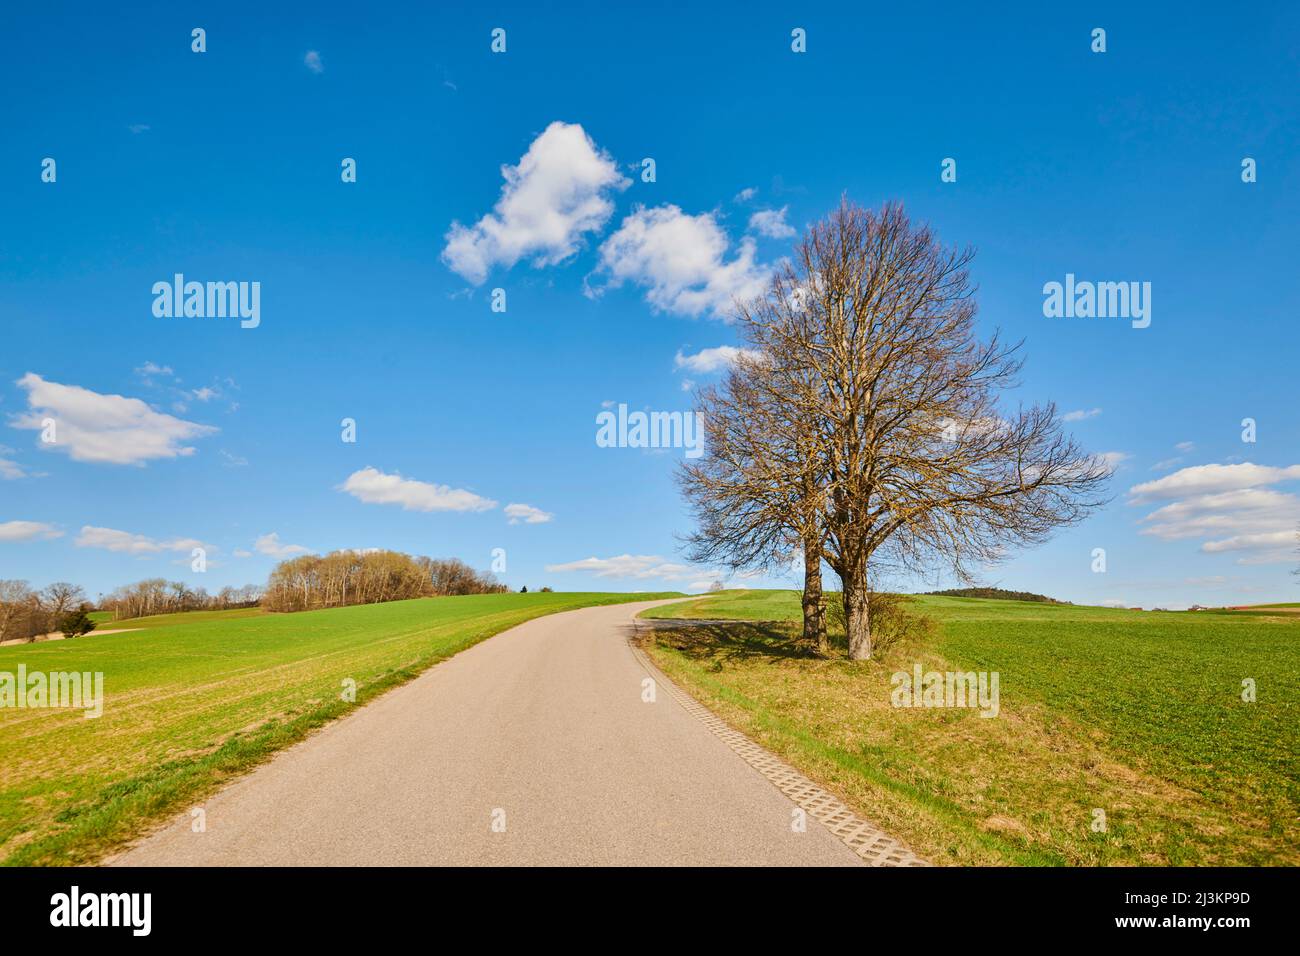 Silver linden or silver lime (Tilia tomentosa) beside a country road; Bavaria, Germany Stock Photo